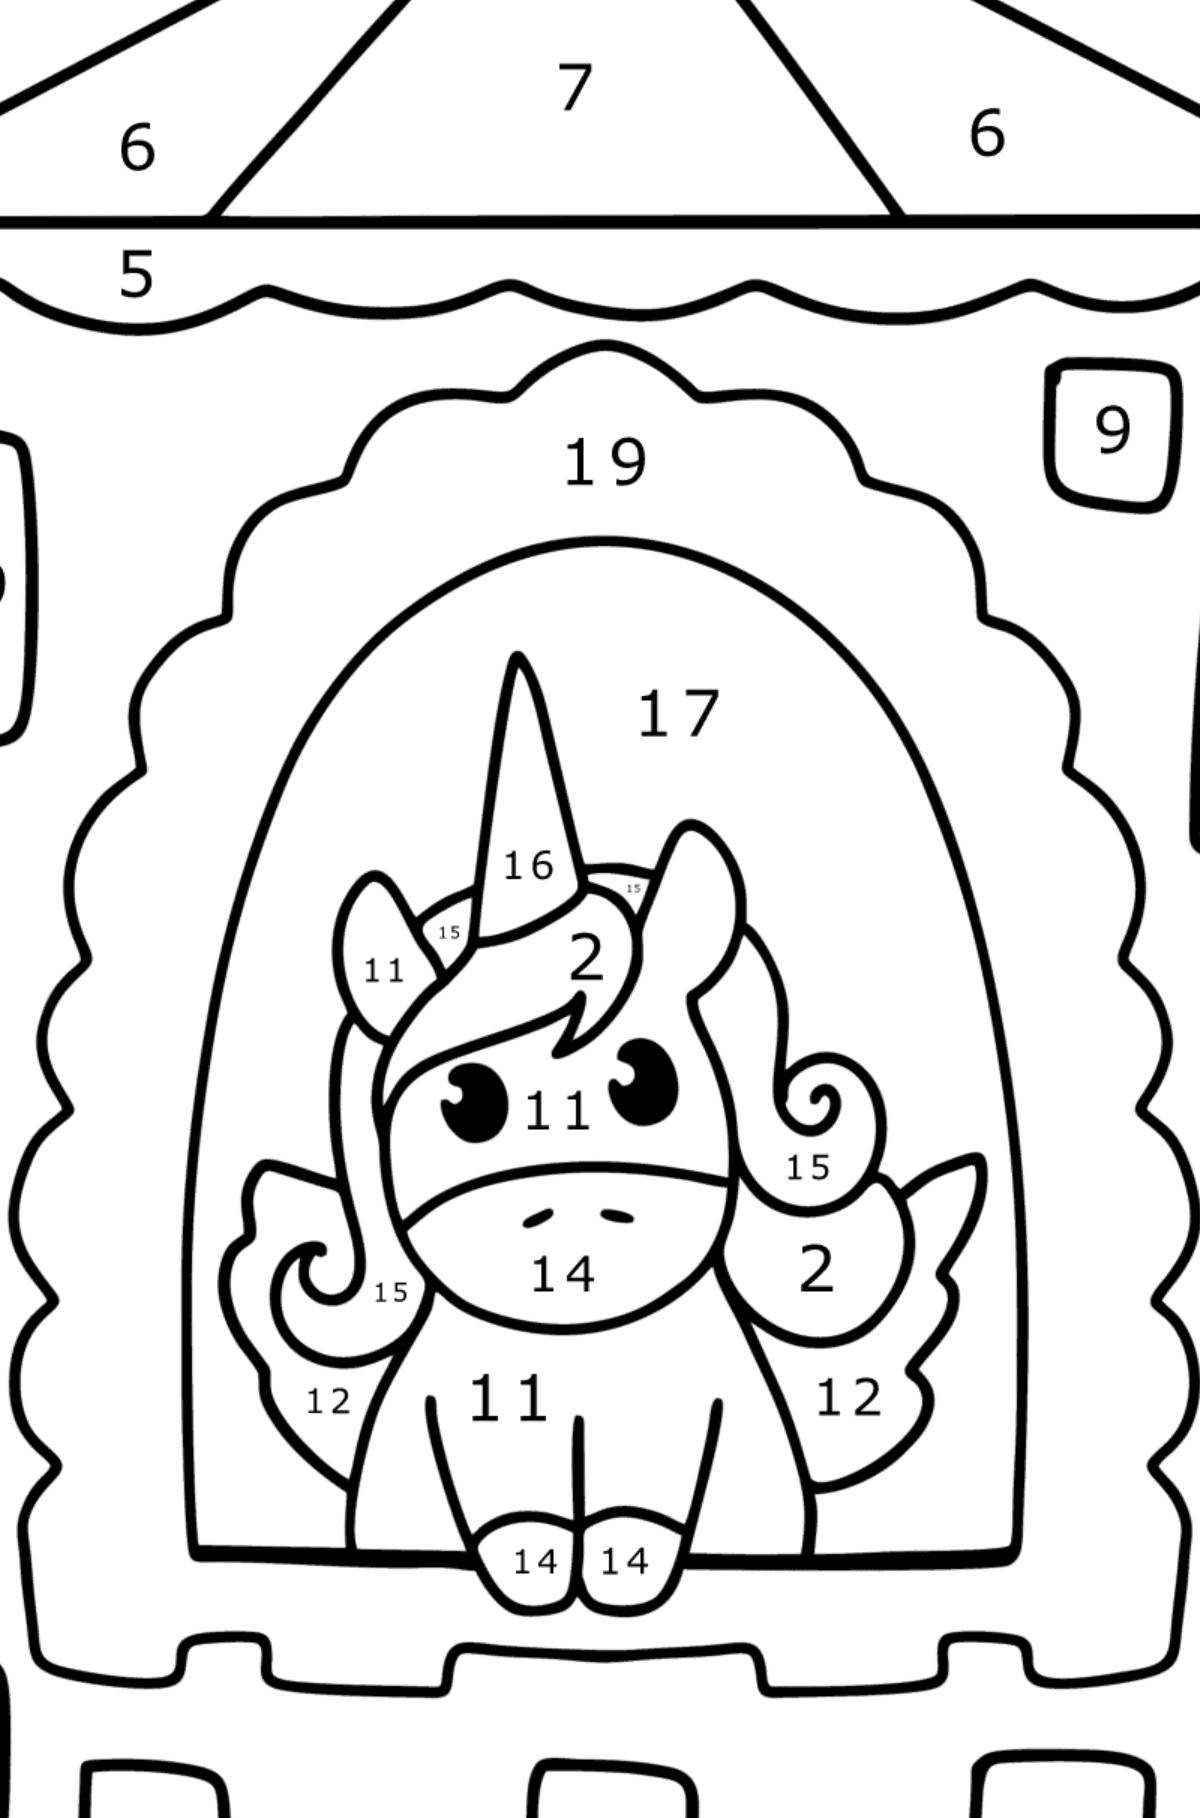 Unicorn live coloring by numbers for kids